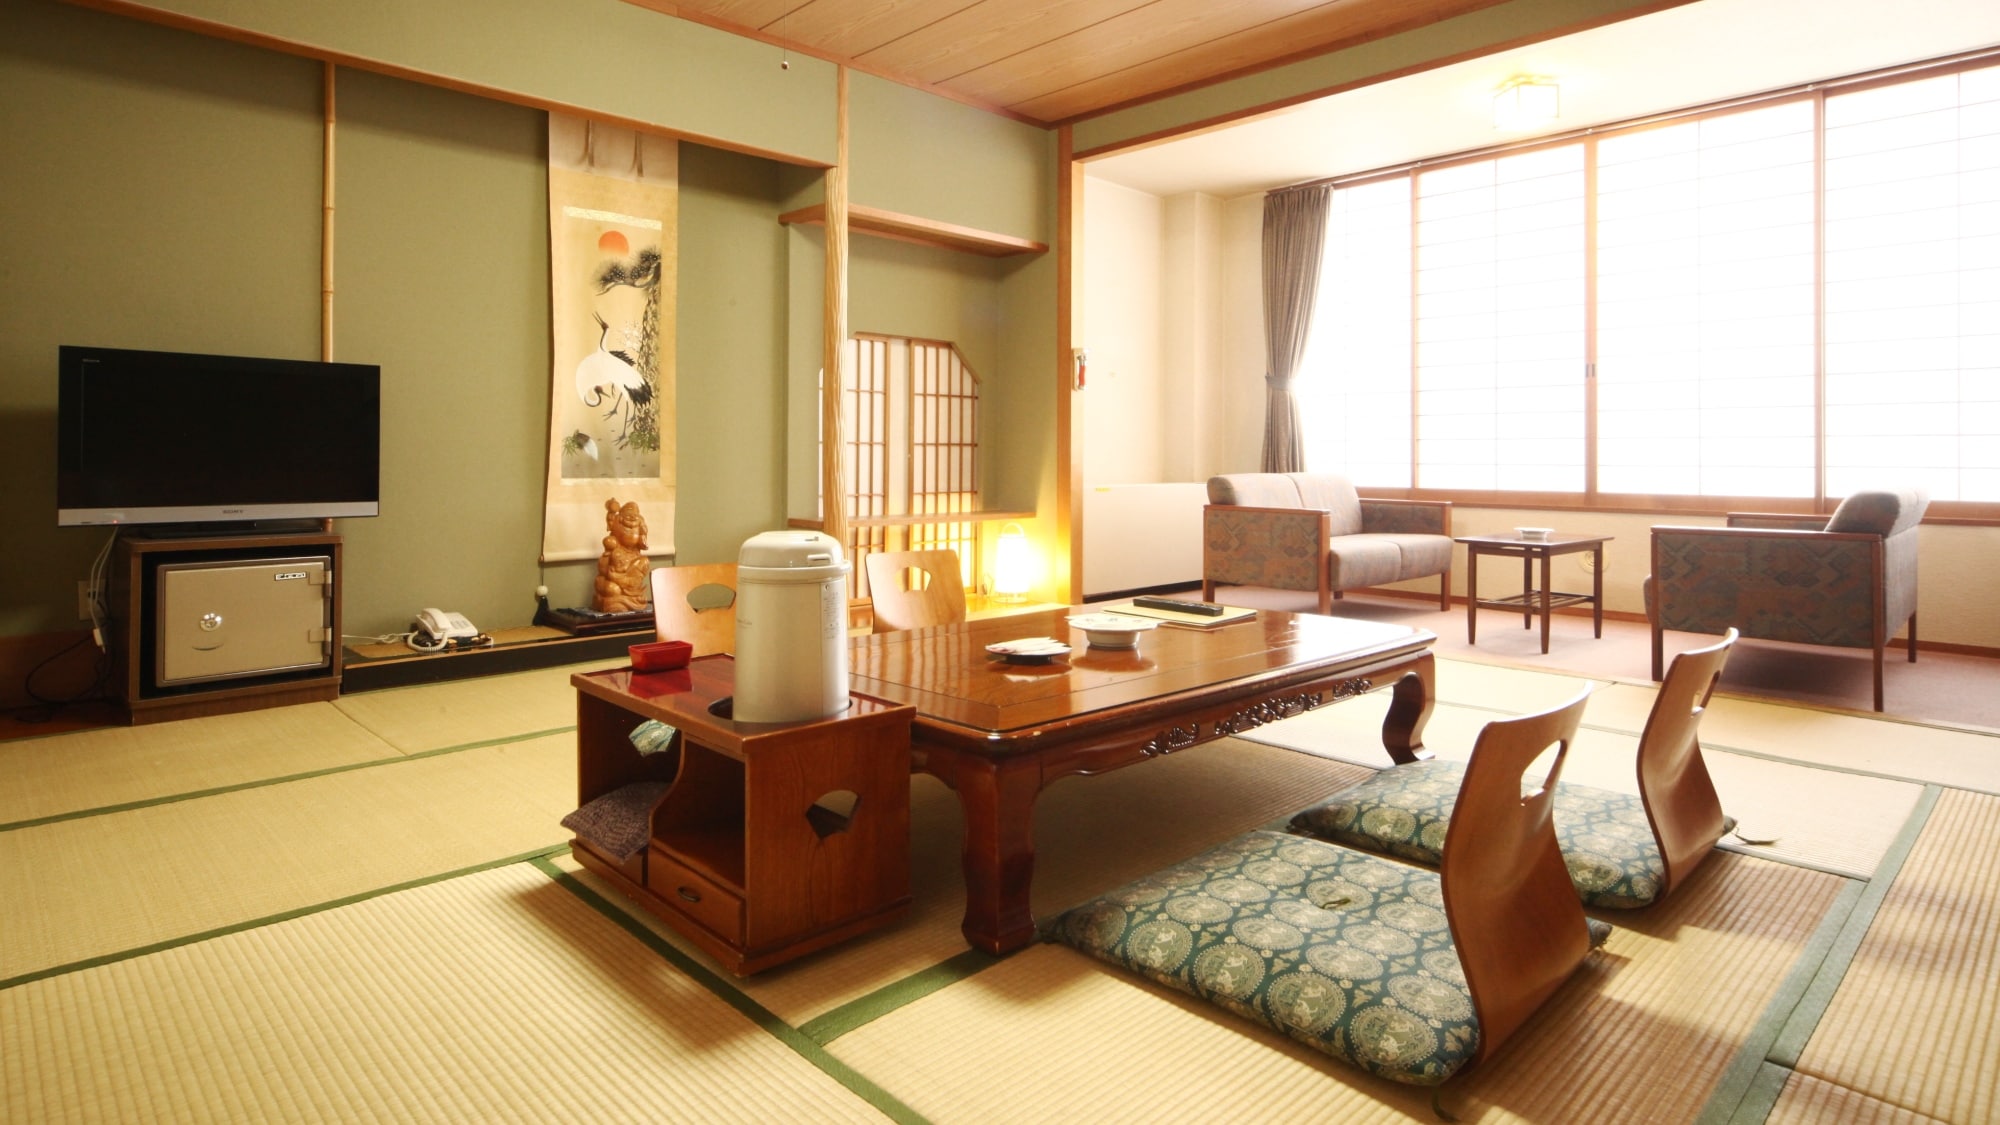 An example of a large Japanese-style room